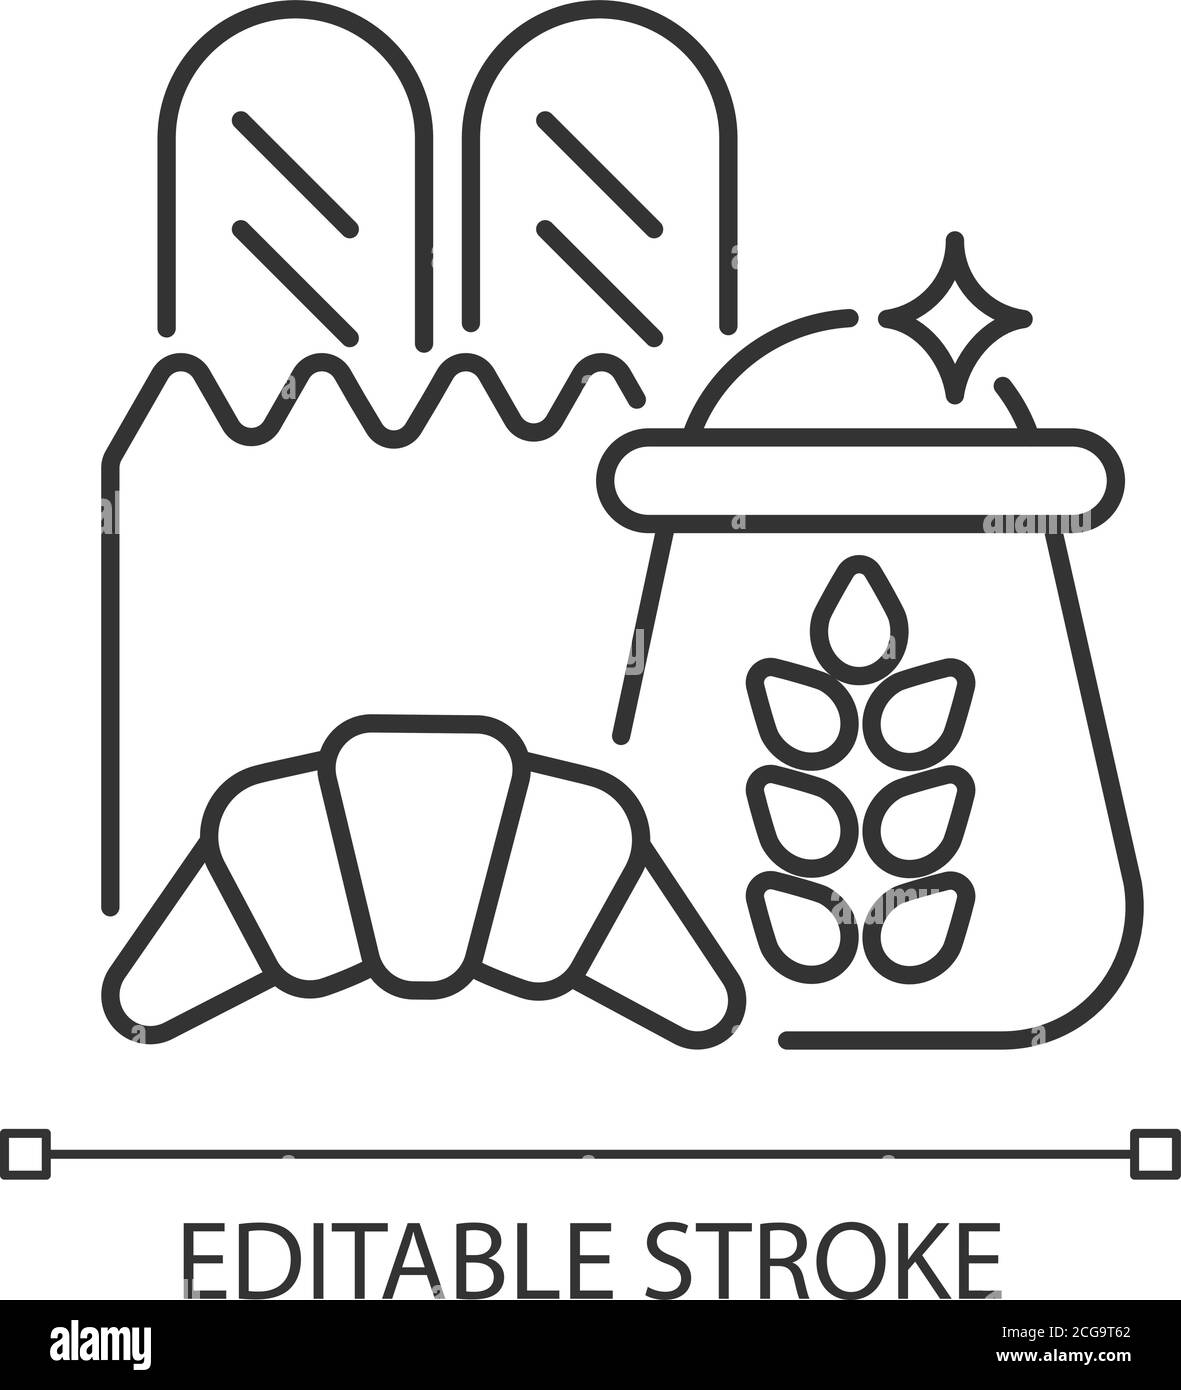 Carbohydrate linear icon Stock Vector